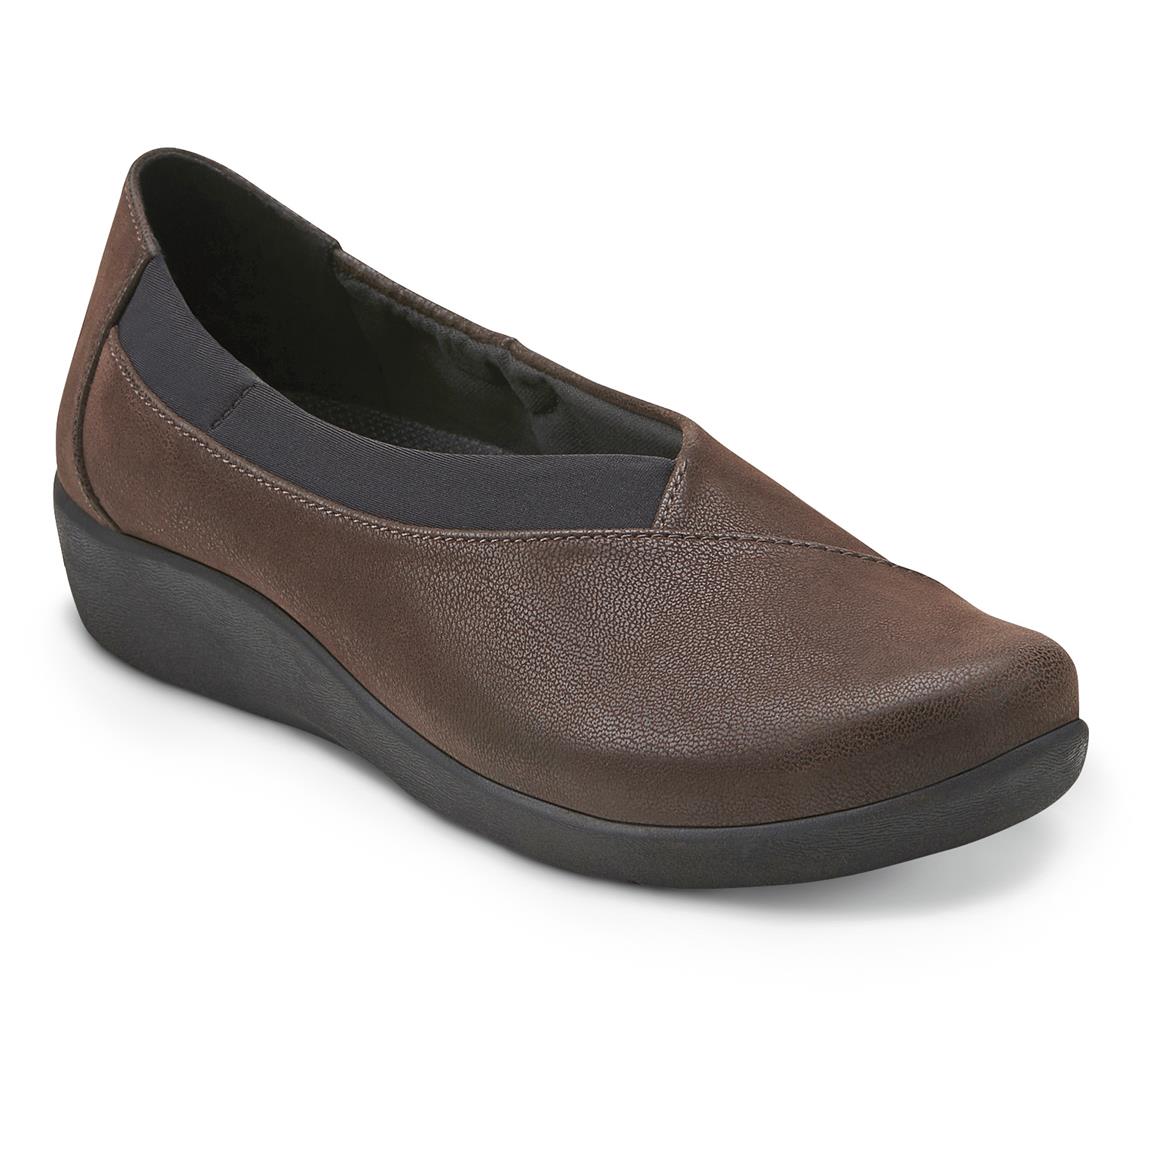 Clarks Women's Sillian Jetay Slip-on Shoes - 644686, Casual Shoes at ...